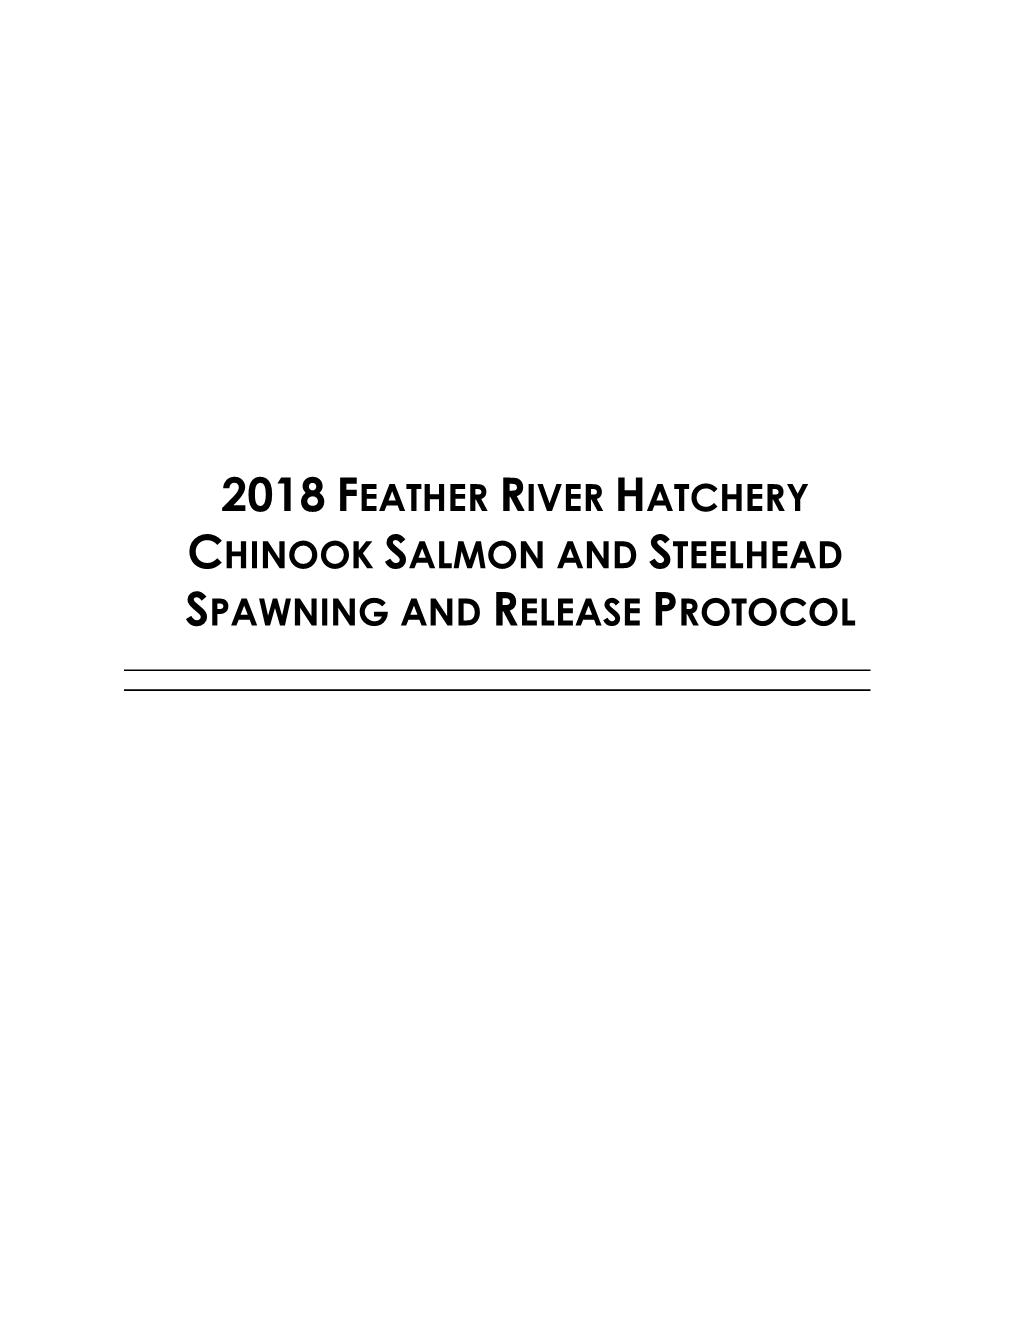 2018 Feather River Hatchery Chinook Salmon and Steelhead Spawning and Release Protocol